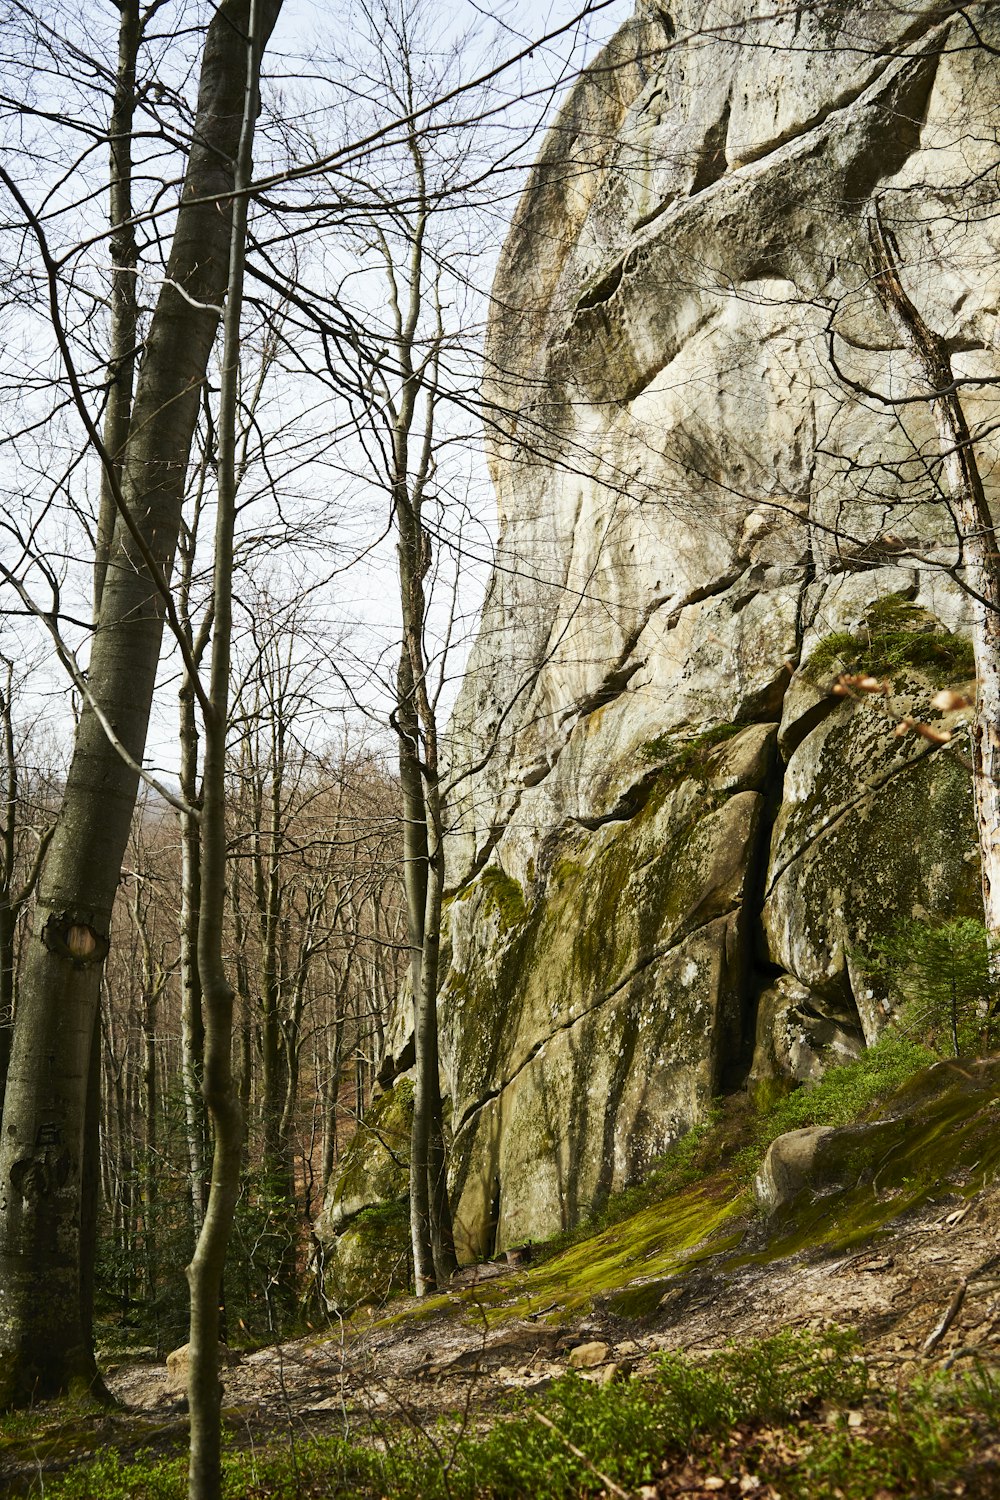 a rocky cliff with trees and moss growing on it